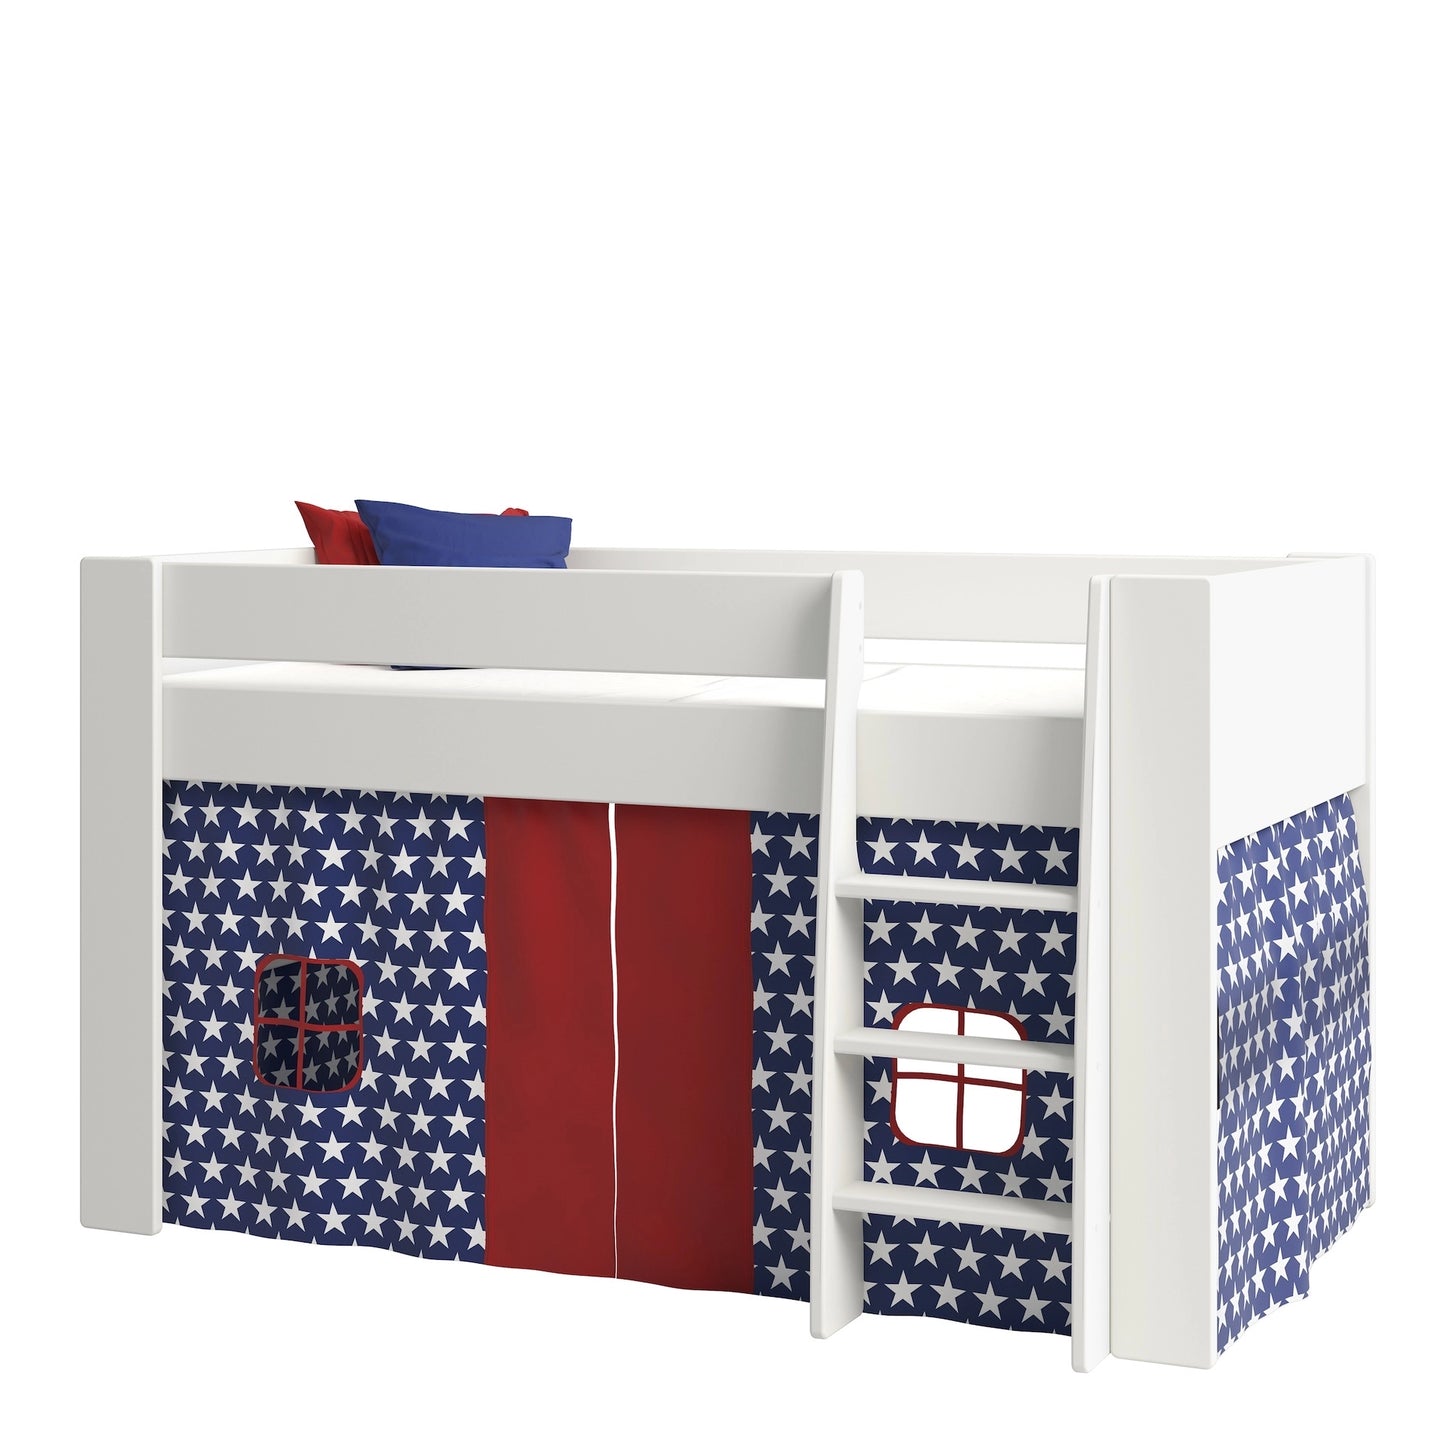 Furniture To Go Steens For Kids Star Tent